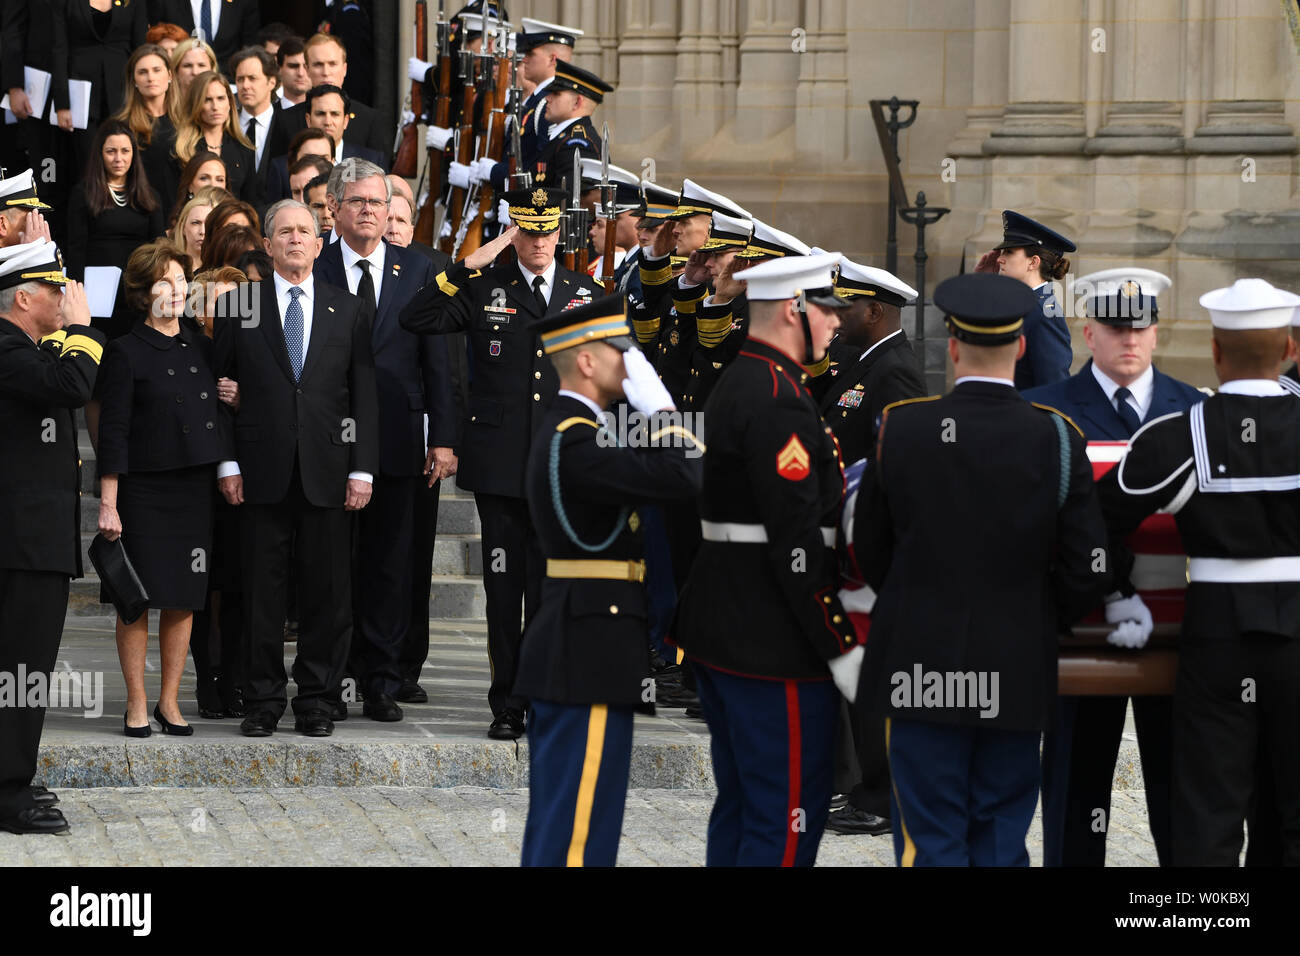 The casket of President George Herbert Walker Bush placed in the hearse as by sons George W. Bush and Jeb Bush watch following the funeral of the 41st President of the United States at the National Cathedral in Washington D.C. on December 5, 2018.   Photo by Pat Benic/UPI Stock Photo